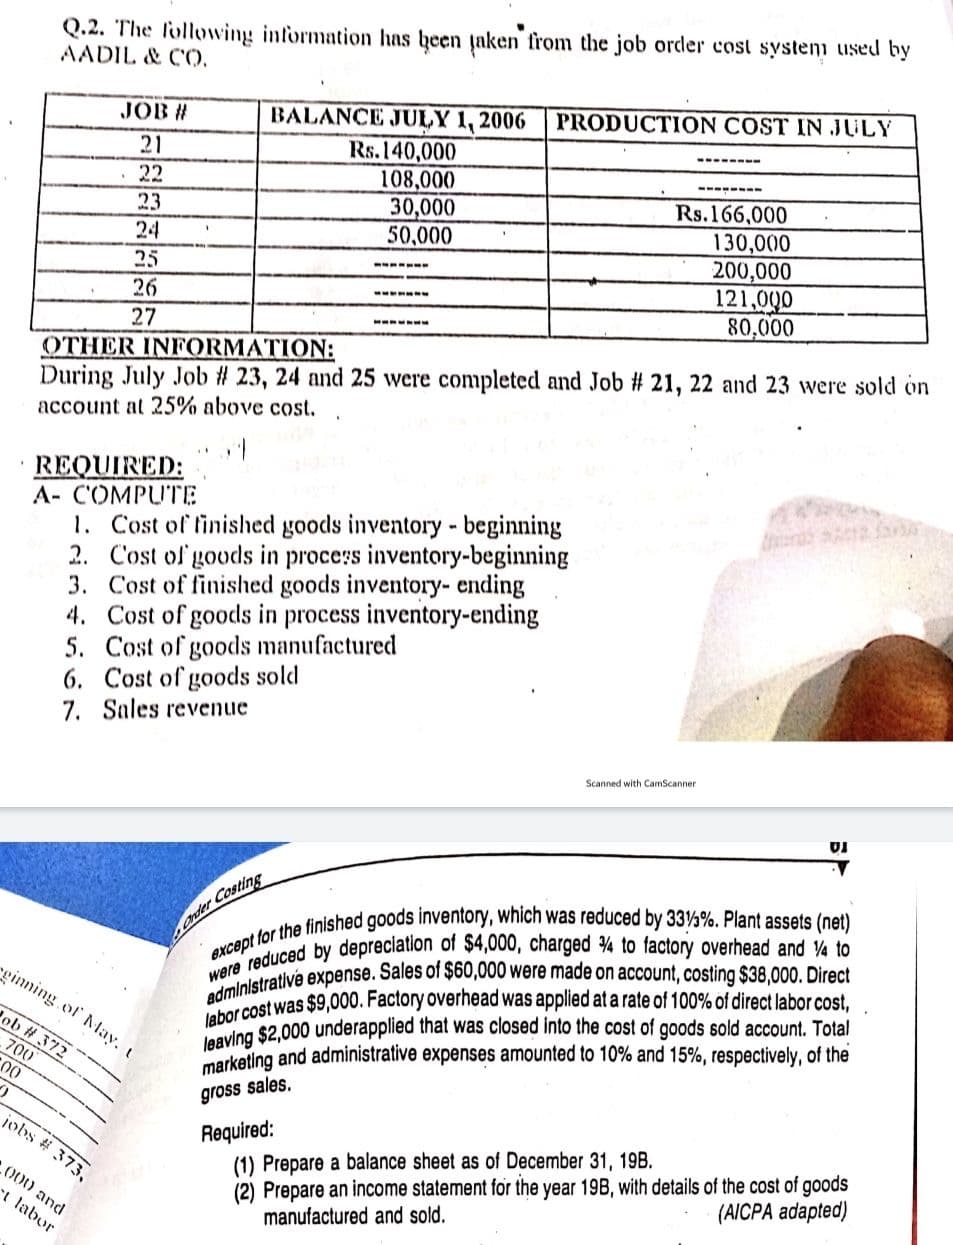 Q.2. The lollowing information has been taken from the job order cost systemi used by
AADIL & C),
leaving $2,000 underapplied that was closed into the cost of goods sold account. Total
PRODUCTION COST IN JULY
BALANCE JULY 1, 2006
Rs.140,000
108,000
30,000
50,000
JOB #
21
22
Rs.166,000
130,000
200,000
121,000
80,000
23
24
25
26
27
OTHER INFORMATION:
During July Job # 23, 24 and 25 were completed and Job # 21, 22 and 23 were sold on
account at 25% above cost.
REQUIRED:
A- COMPUTE
1. Cost of finished goods inventory - beginning
2. Cost of goods in proce:s inventory-beginning
3. Cost of finished goods inventory- ending
4. Cost of goods in process inventory-ending
5. Cost of goods manufactured
6. Cost of goods sold
7. Sales revenue
Scanned with CamScanner
UI
Onder Costine
ginning of Mlay, t
admiet was $9,000. Factory overhead was applied at a rate of 100% of direct labor cost,
ob # 372
700
marketing and administrative expenses amounted to 10% and 15%, respectively, of the
gross sales.
Required:
(1) Prepare a balance sheet as of December 31, 19B.
(2) Prepare an income statement for the year 19B, with details of the cost of goods
manufactured and sold.
jobs # 373,
000 and
(AICPA adapted)
t labor
